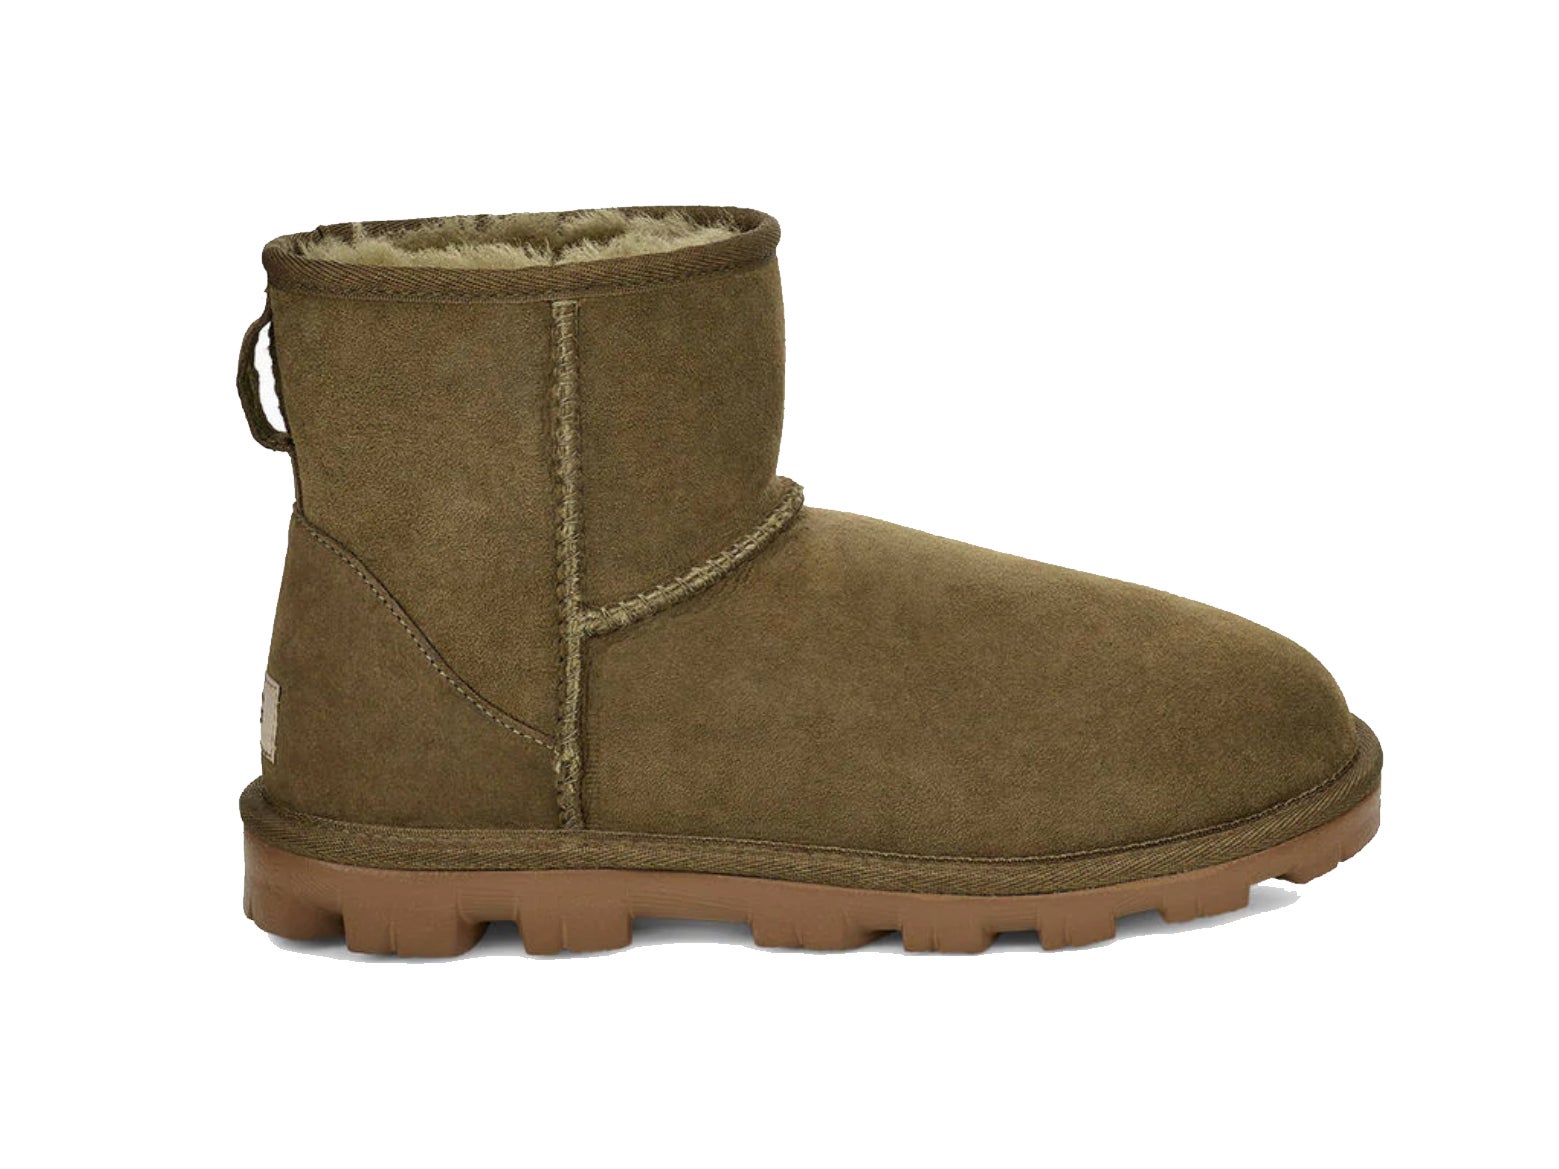 ugg boxing day sale